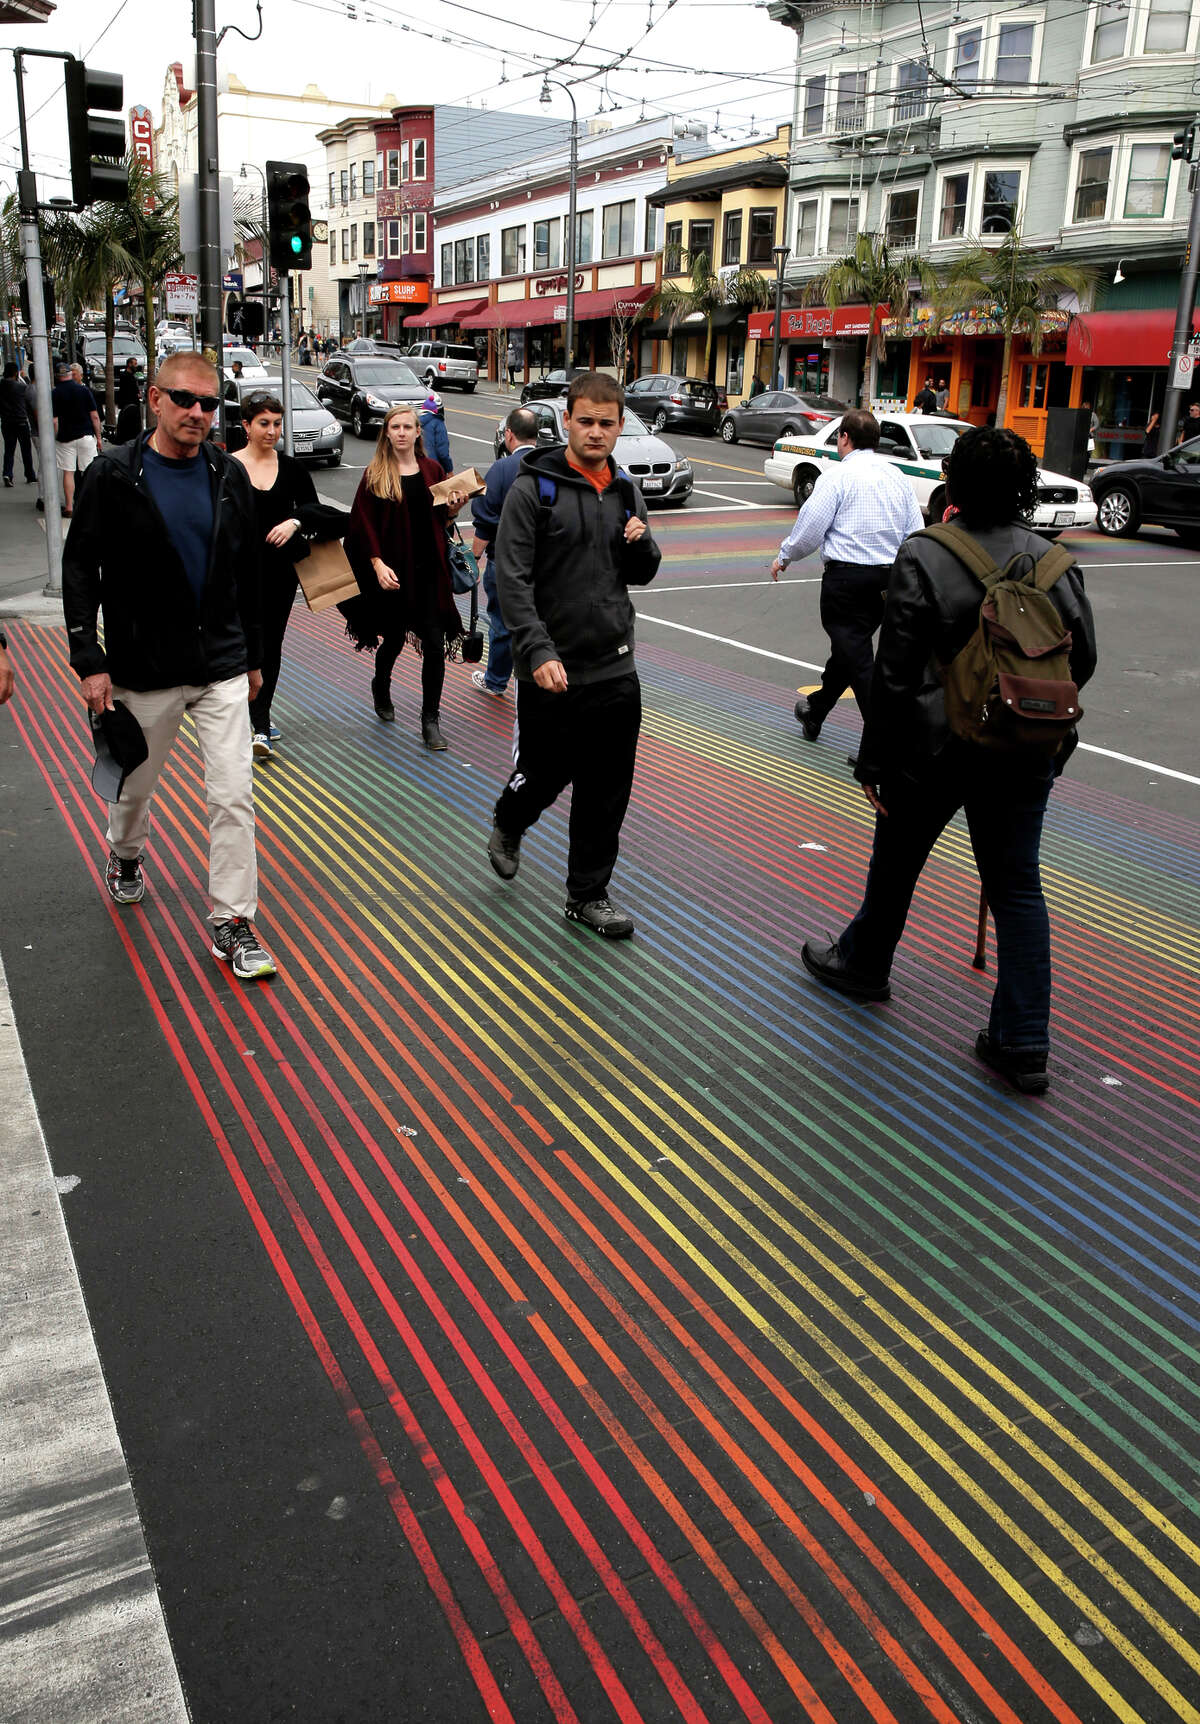 The corner of 18th and Castro streets, with its rainbow-striped crosswalks, remains the epicenter of San Francisco’s highly visible lesbian, gay, bisexual and transgender community.